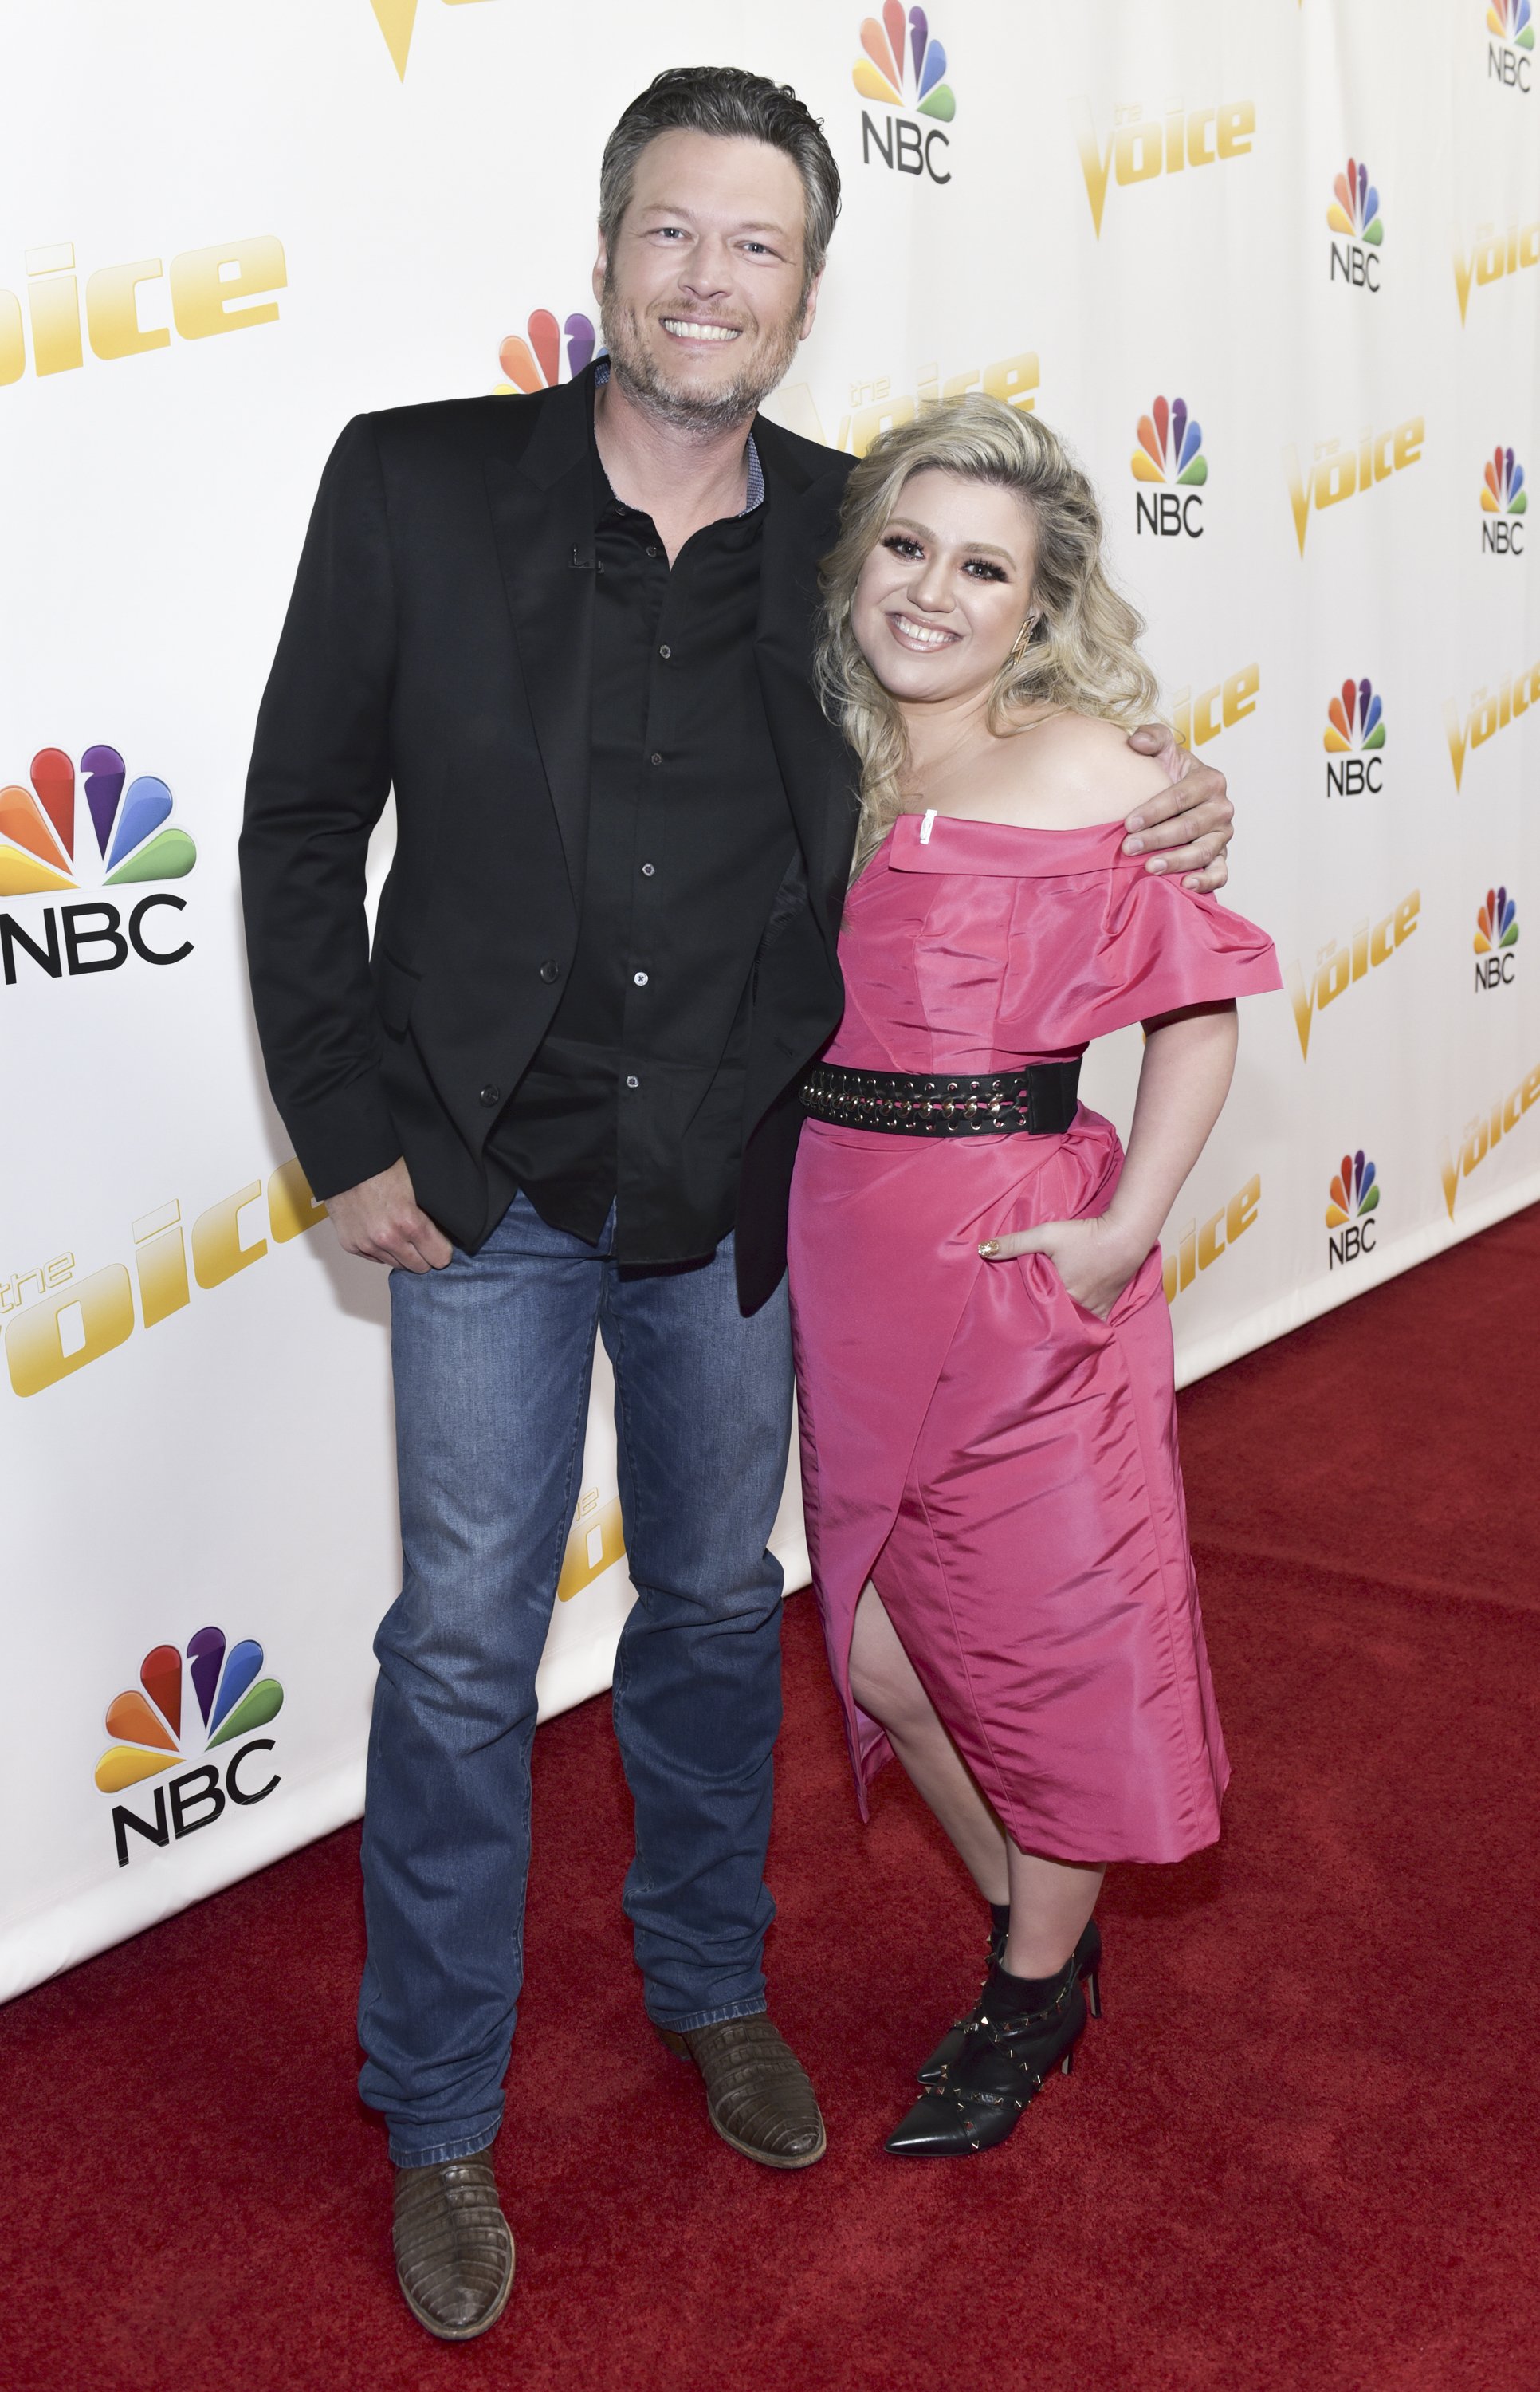 Blake Shelton and Kelly Clarkson posing for the cameras | Photo: Getty Images